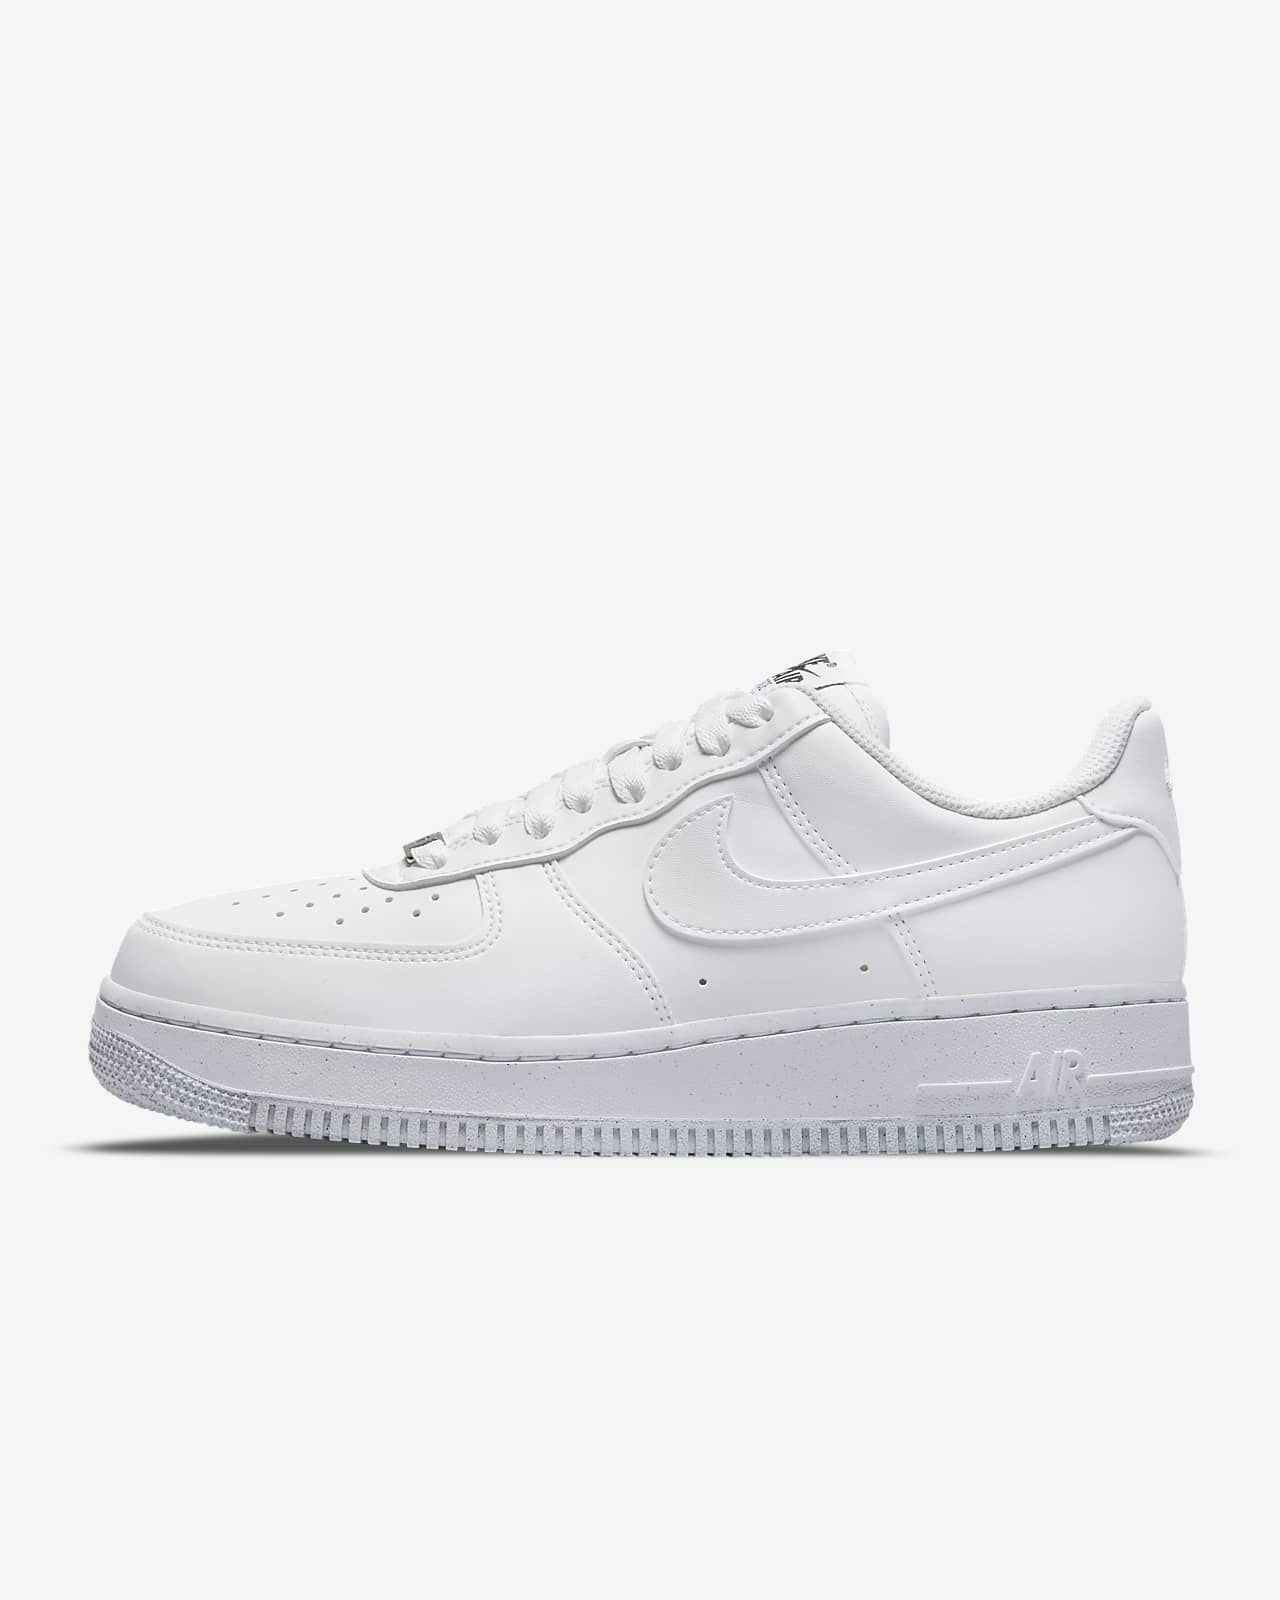 Nike Air Force 1 '07 Next Nature | Nike Asia Pacific